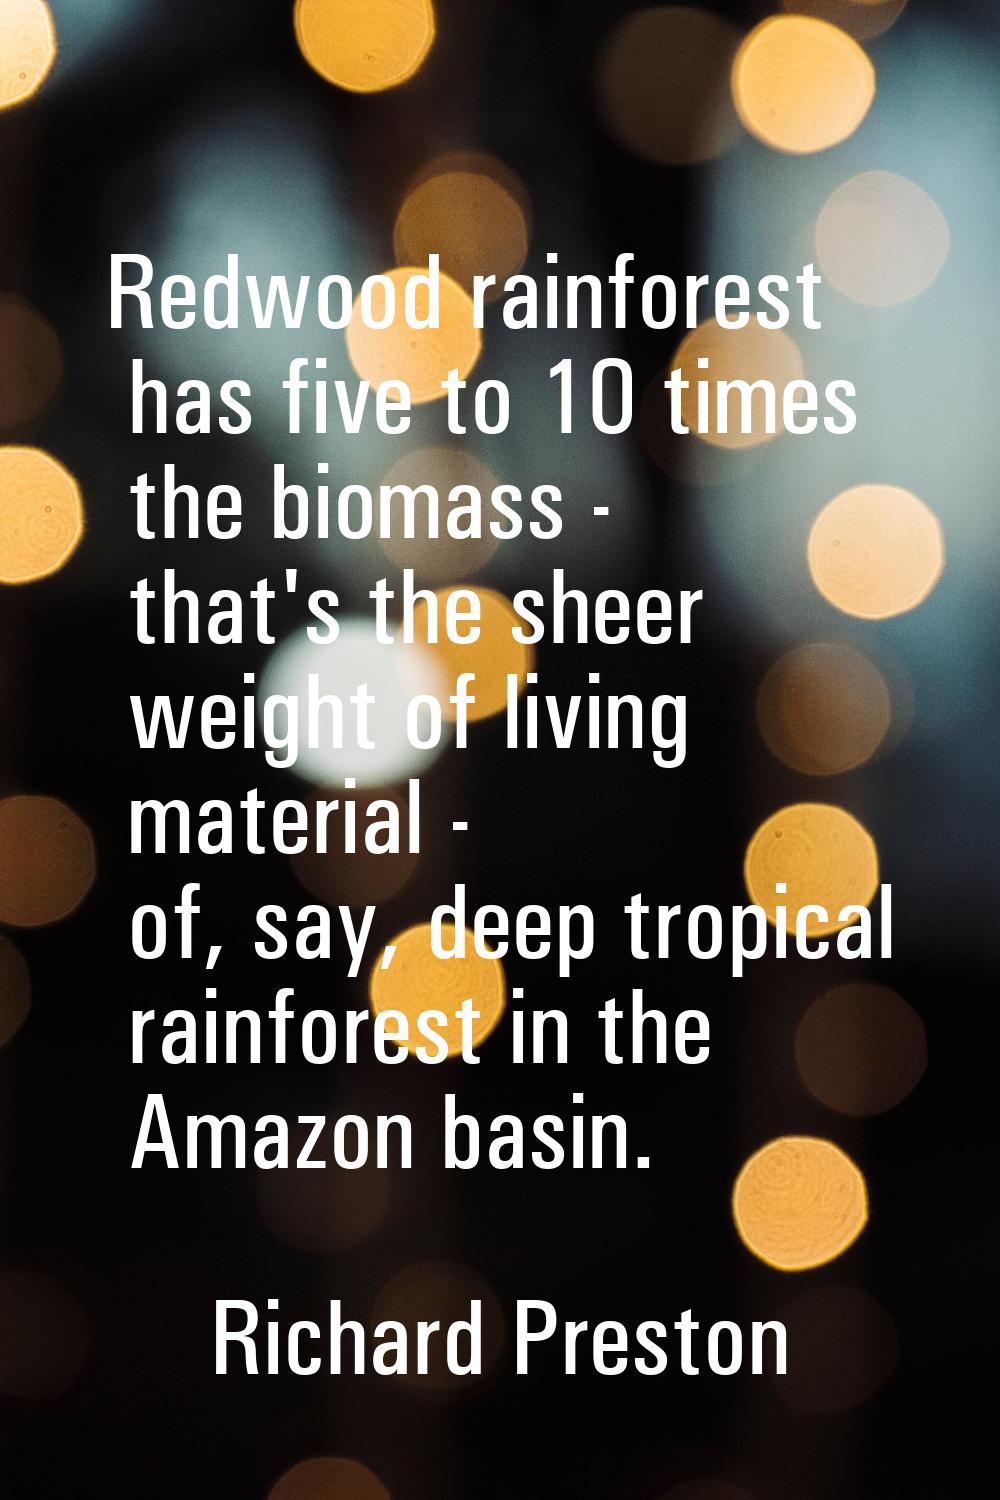 Redwood rainforest has five to 10 times the biomass - that's the sheer weight of living material - 